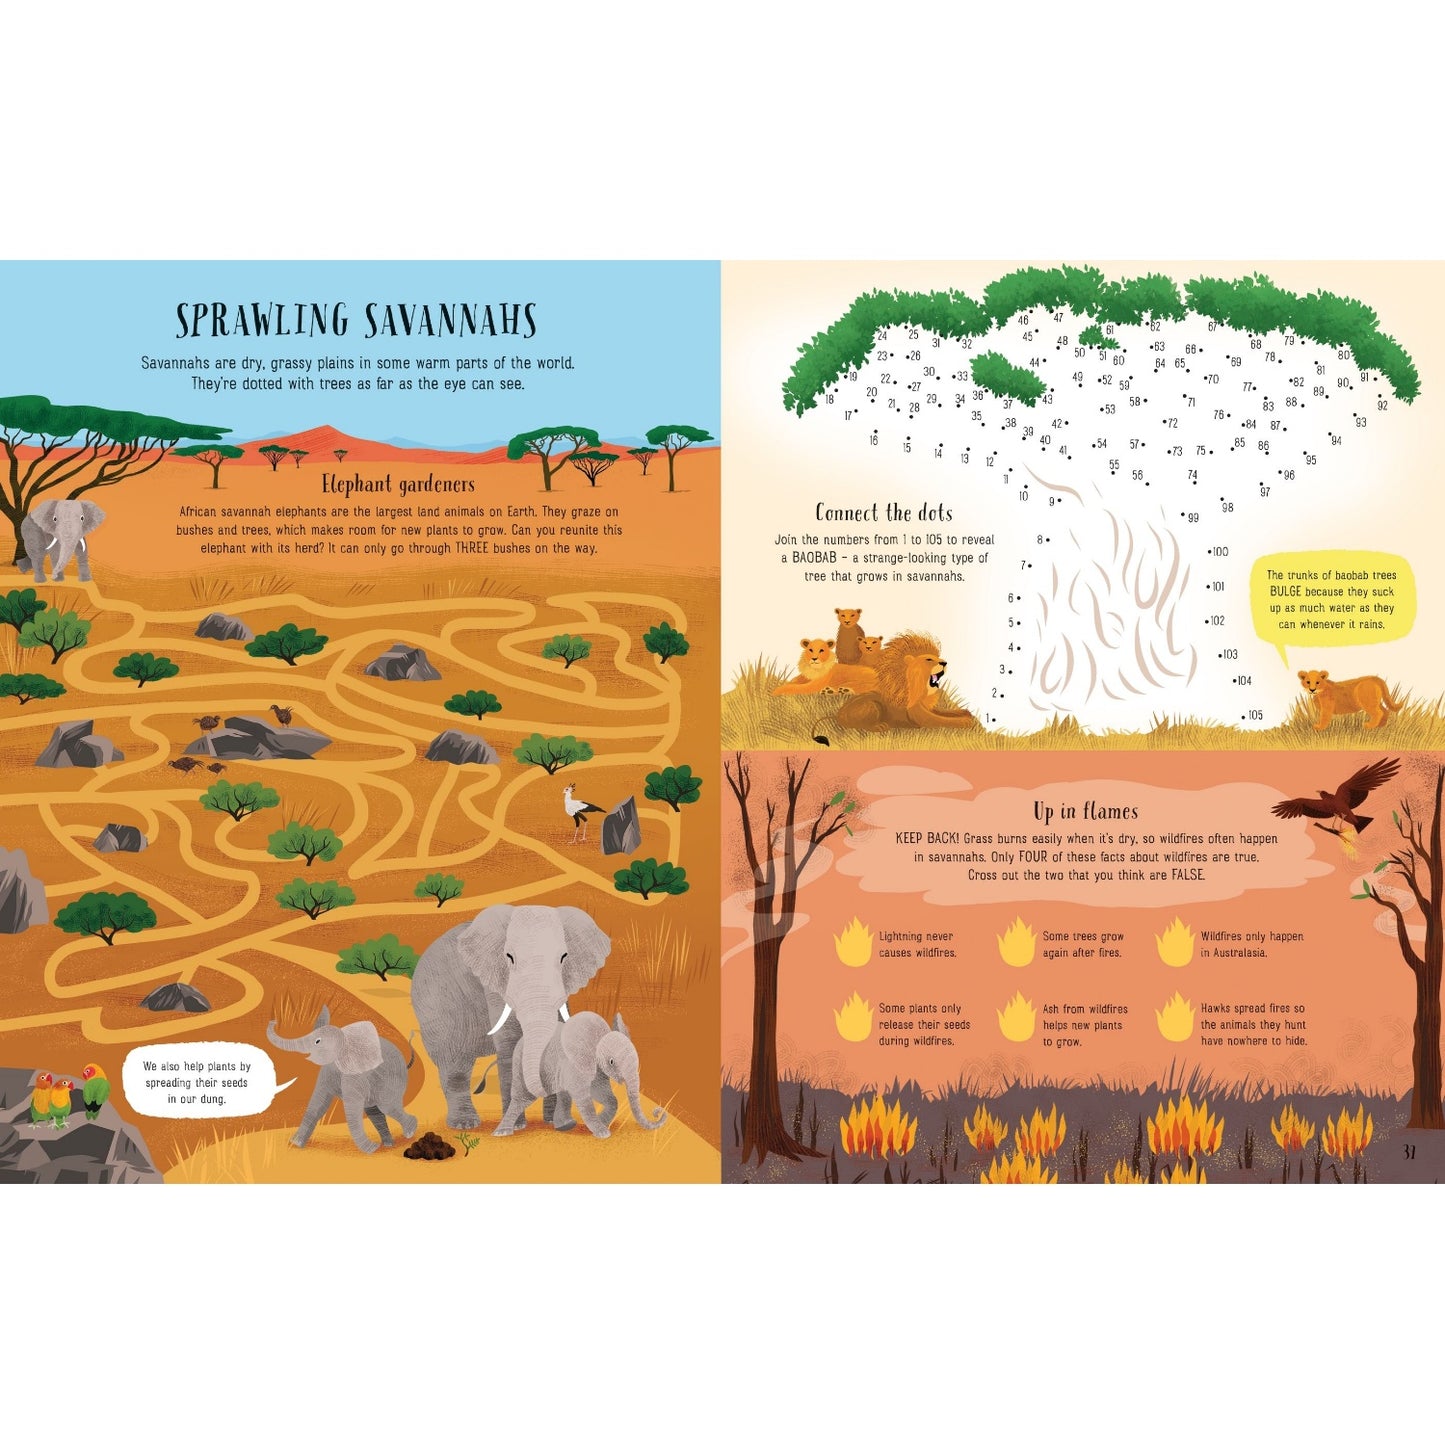 Planet Earth Activity Book | Paperback | Children's Activity Book